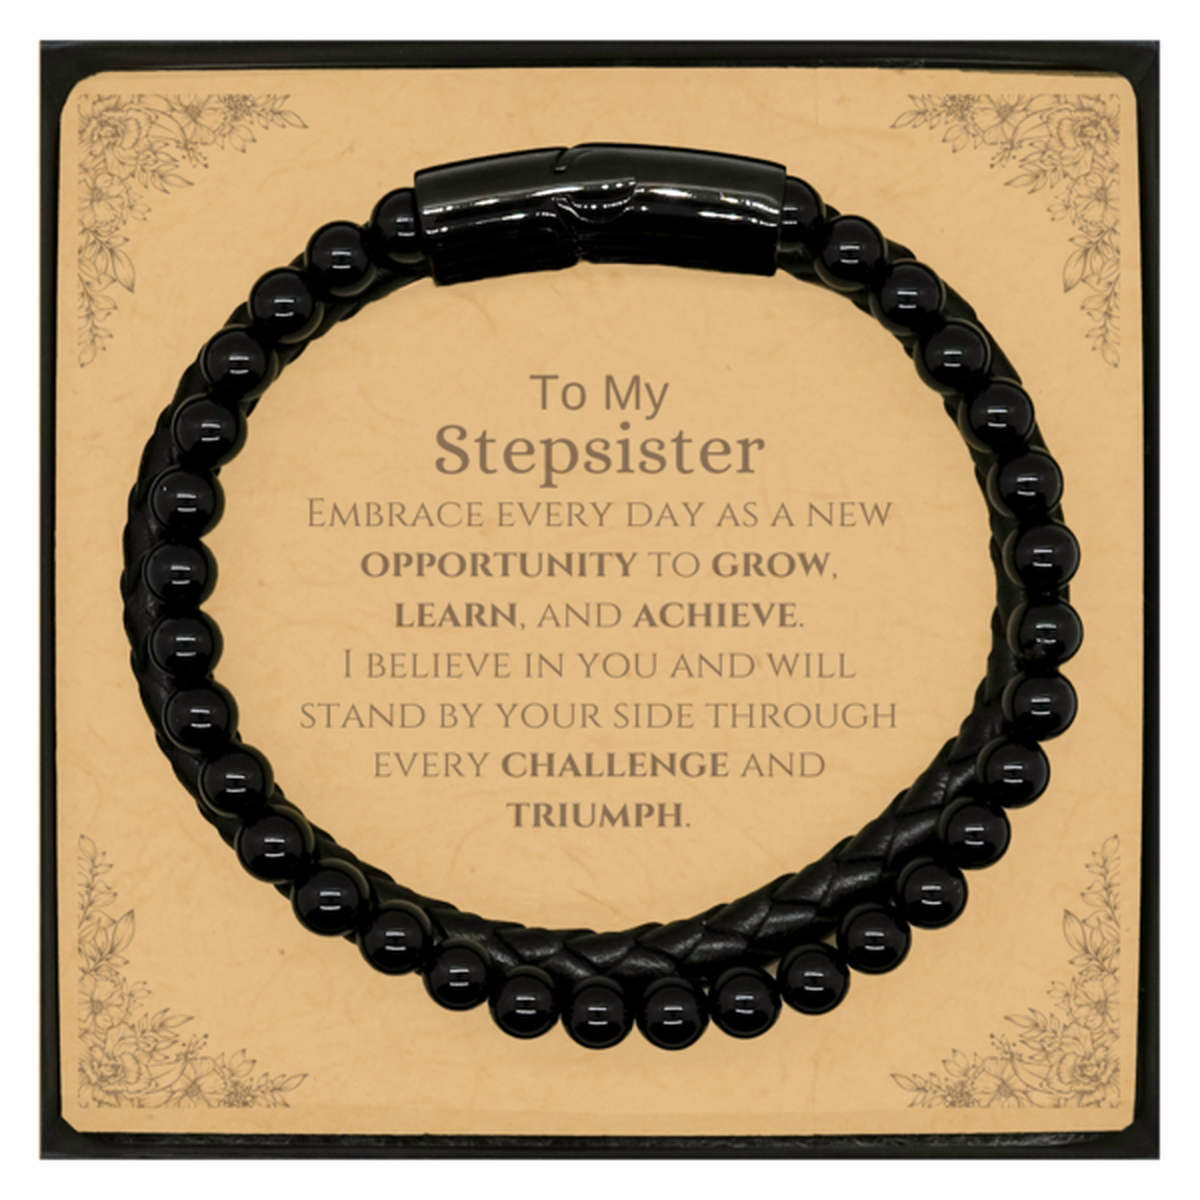 To My Stepsister Gifts, I believe in you and will stand by your side, Inspirational Stone Leather Bracelets For Stepsister, Birthday Christmas Motivational Stepsister Gifts